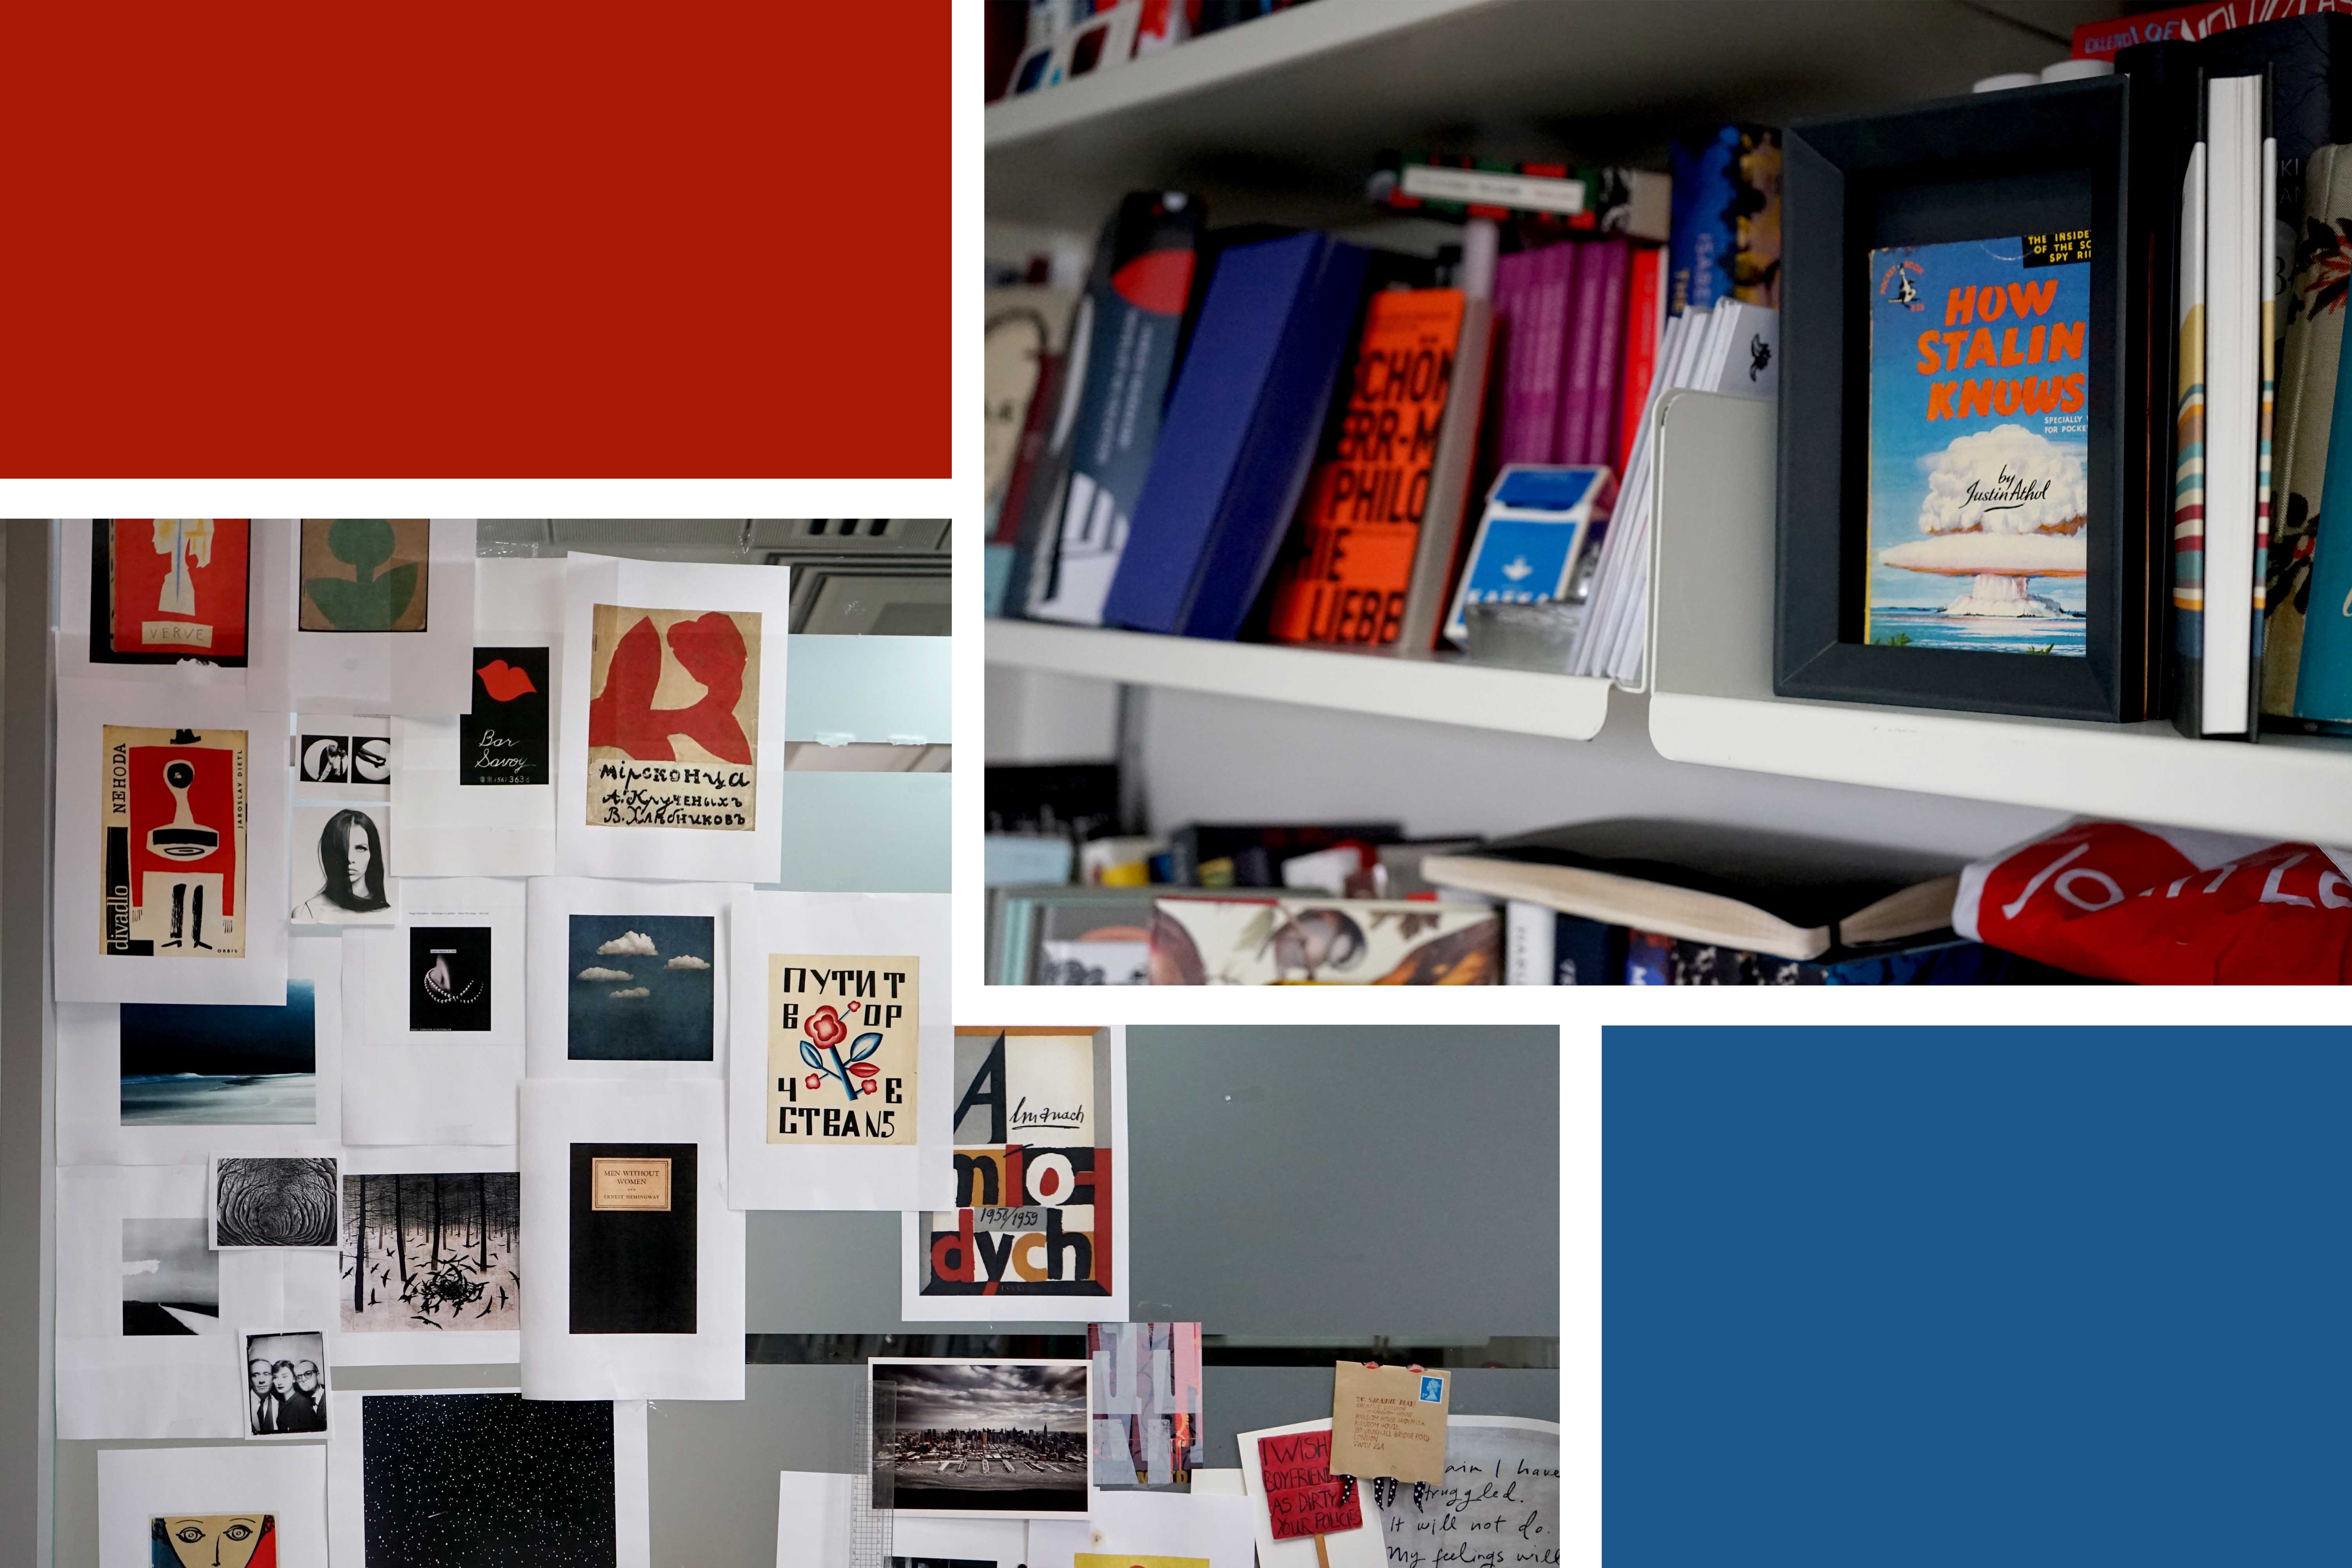 Bookshelves and mood board in Suzanne's office